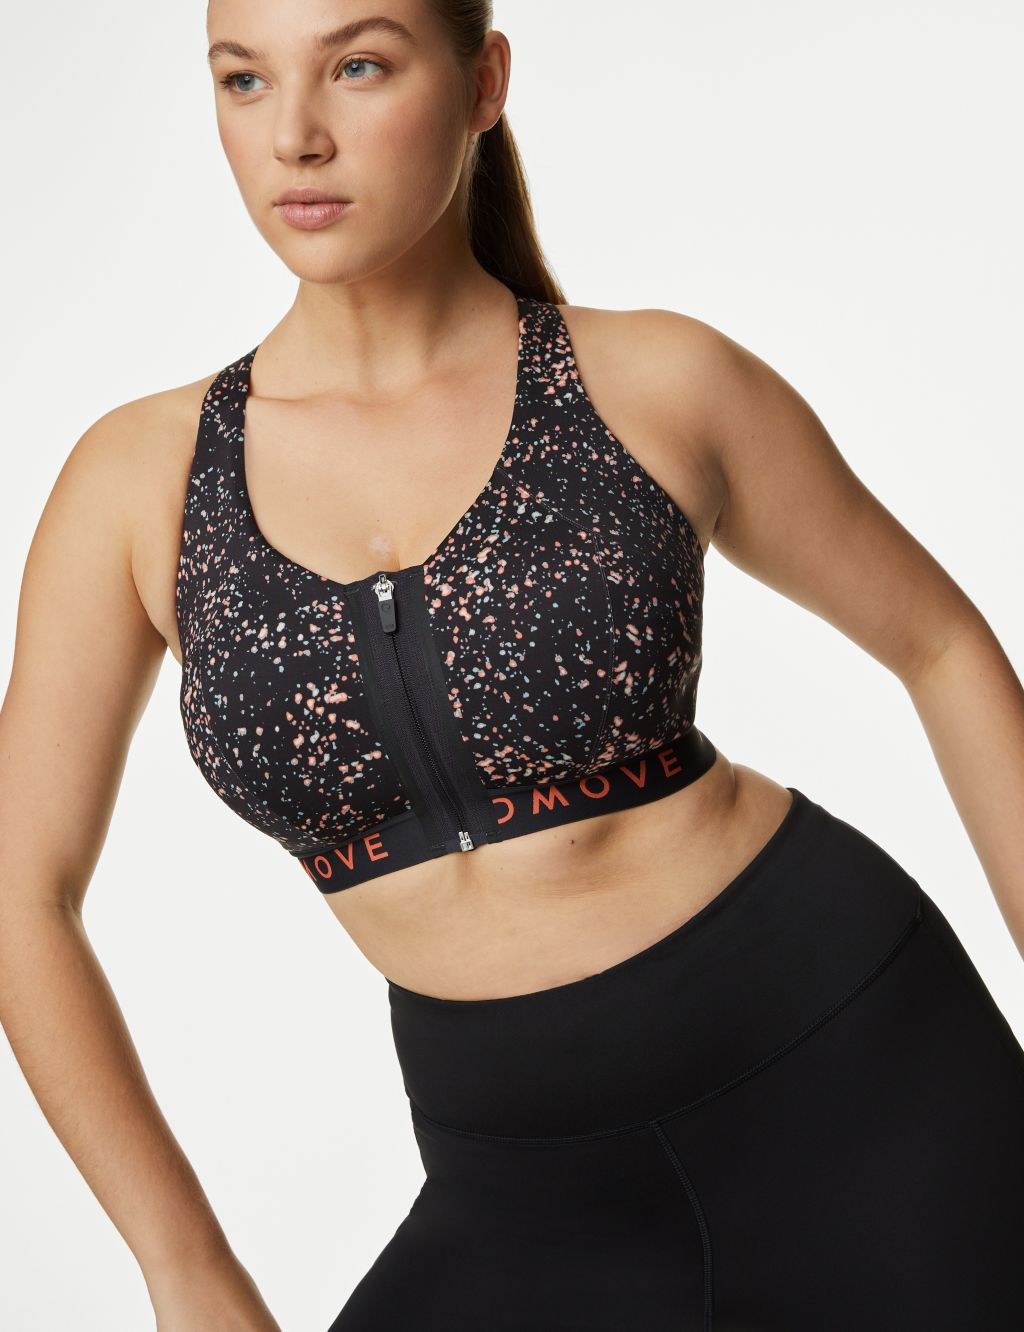 M&s High Impact Total Support Sports Bra Non-padded Non-wired Gym